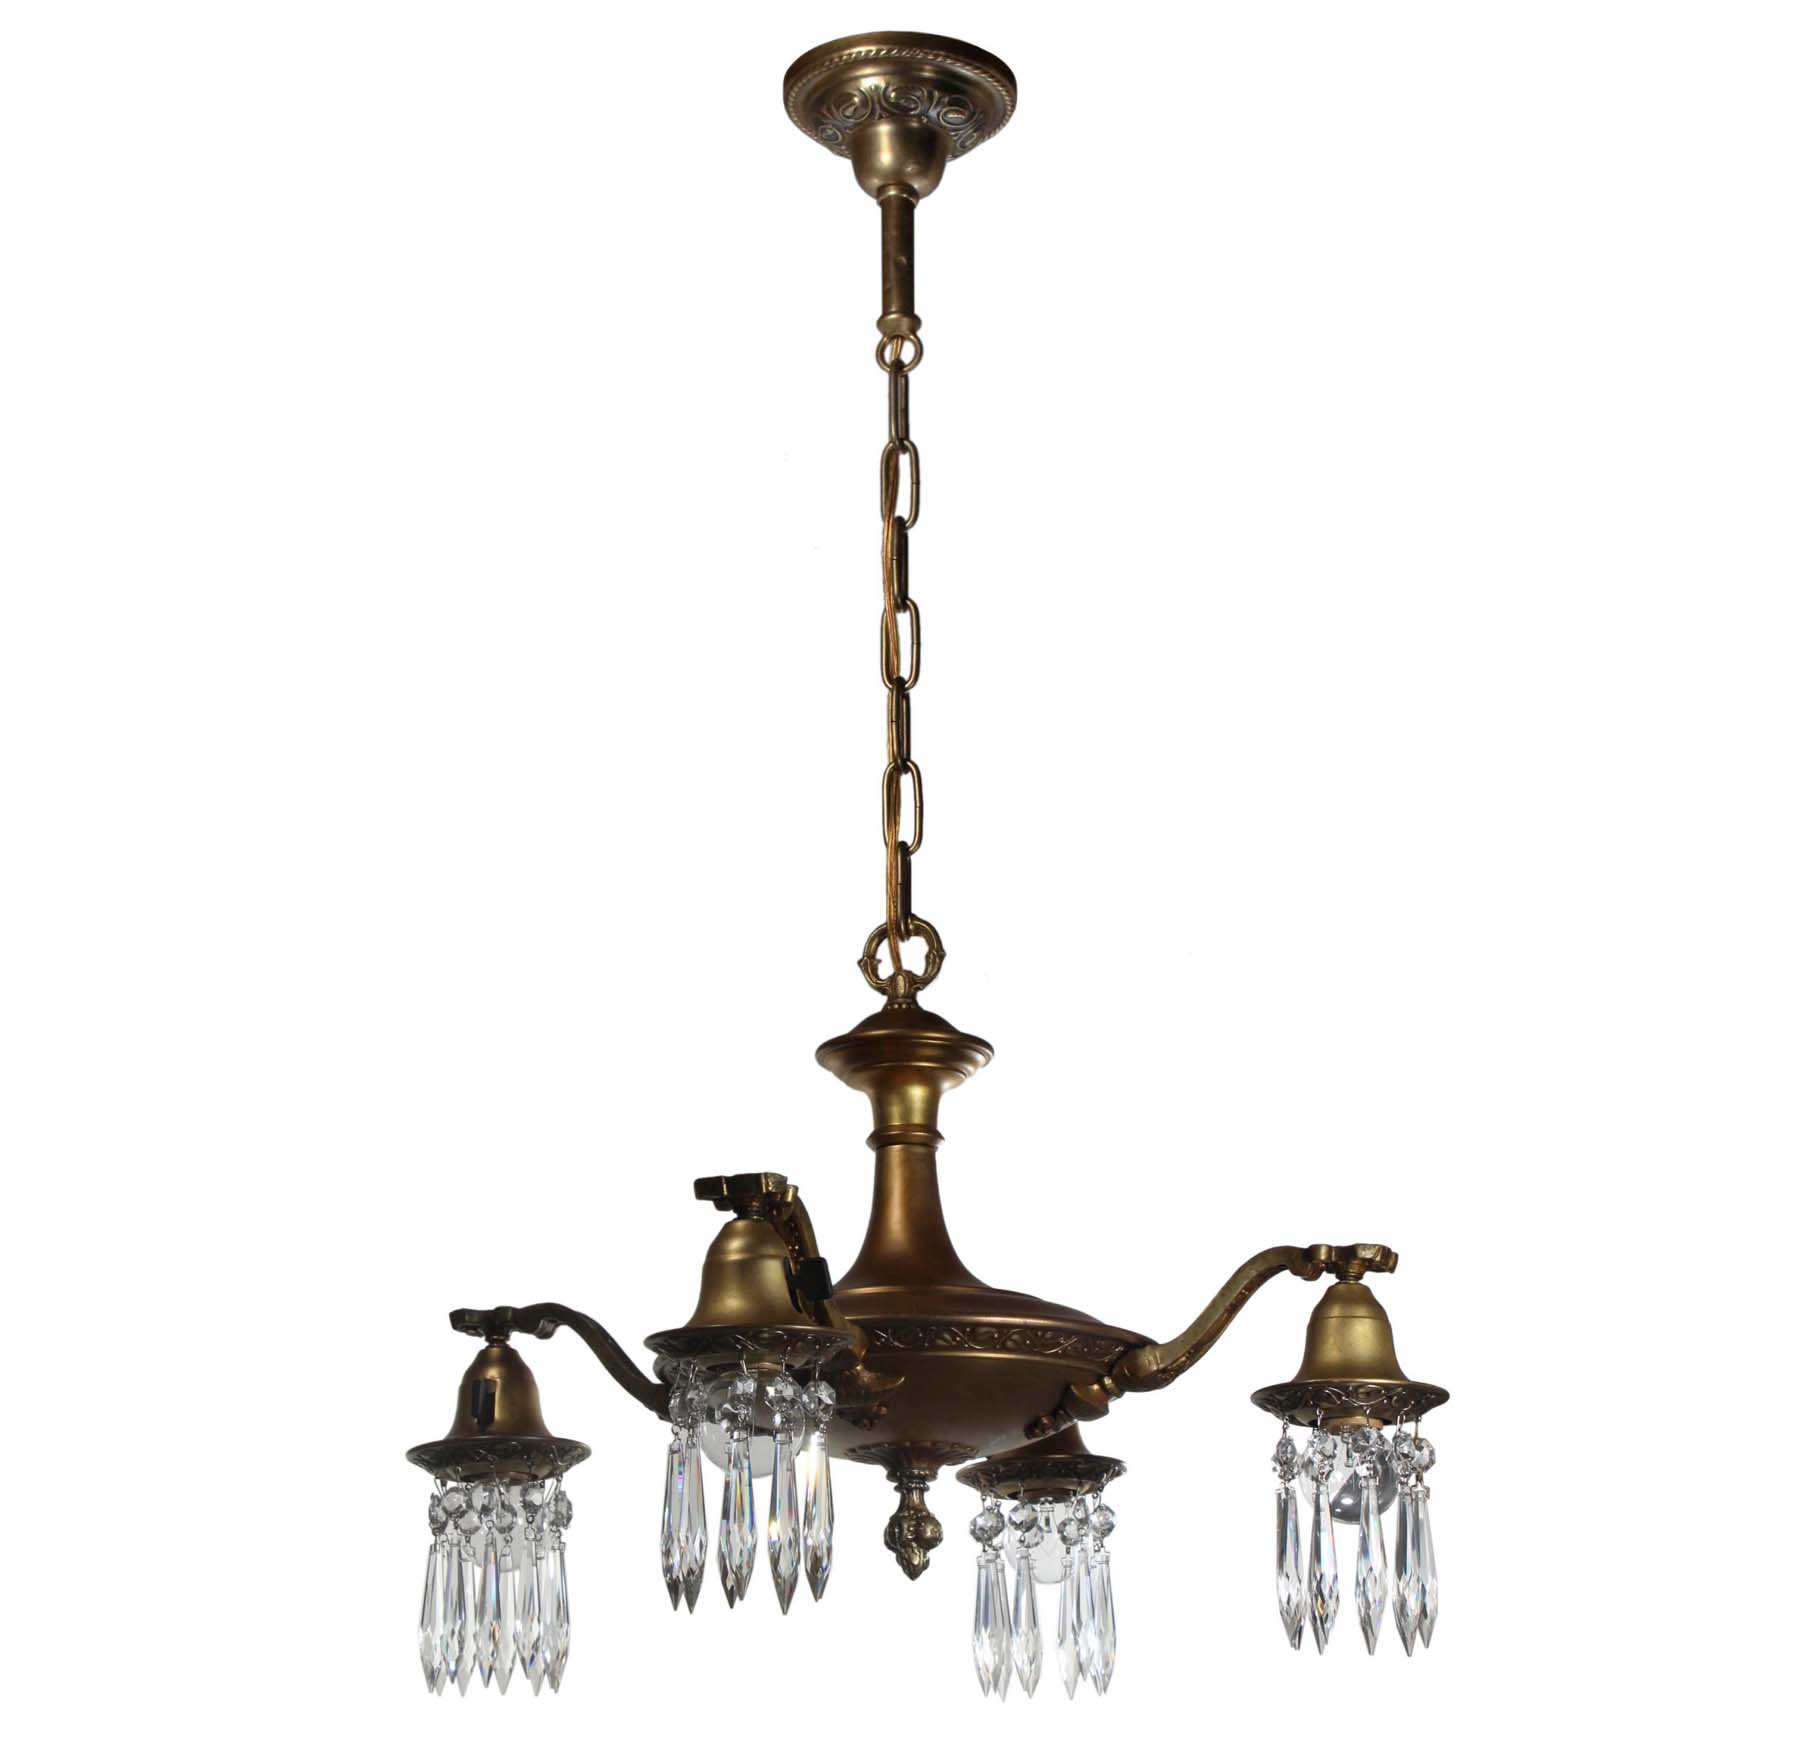 SOLD Antique Brass Four-Light Chandelier with Prisms-68429